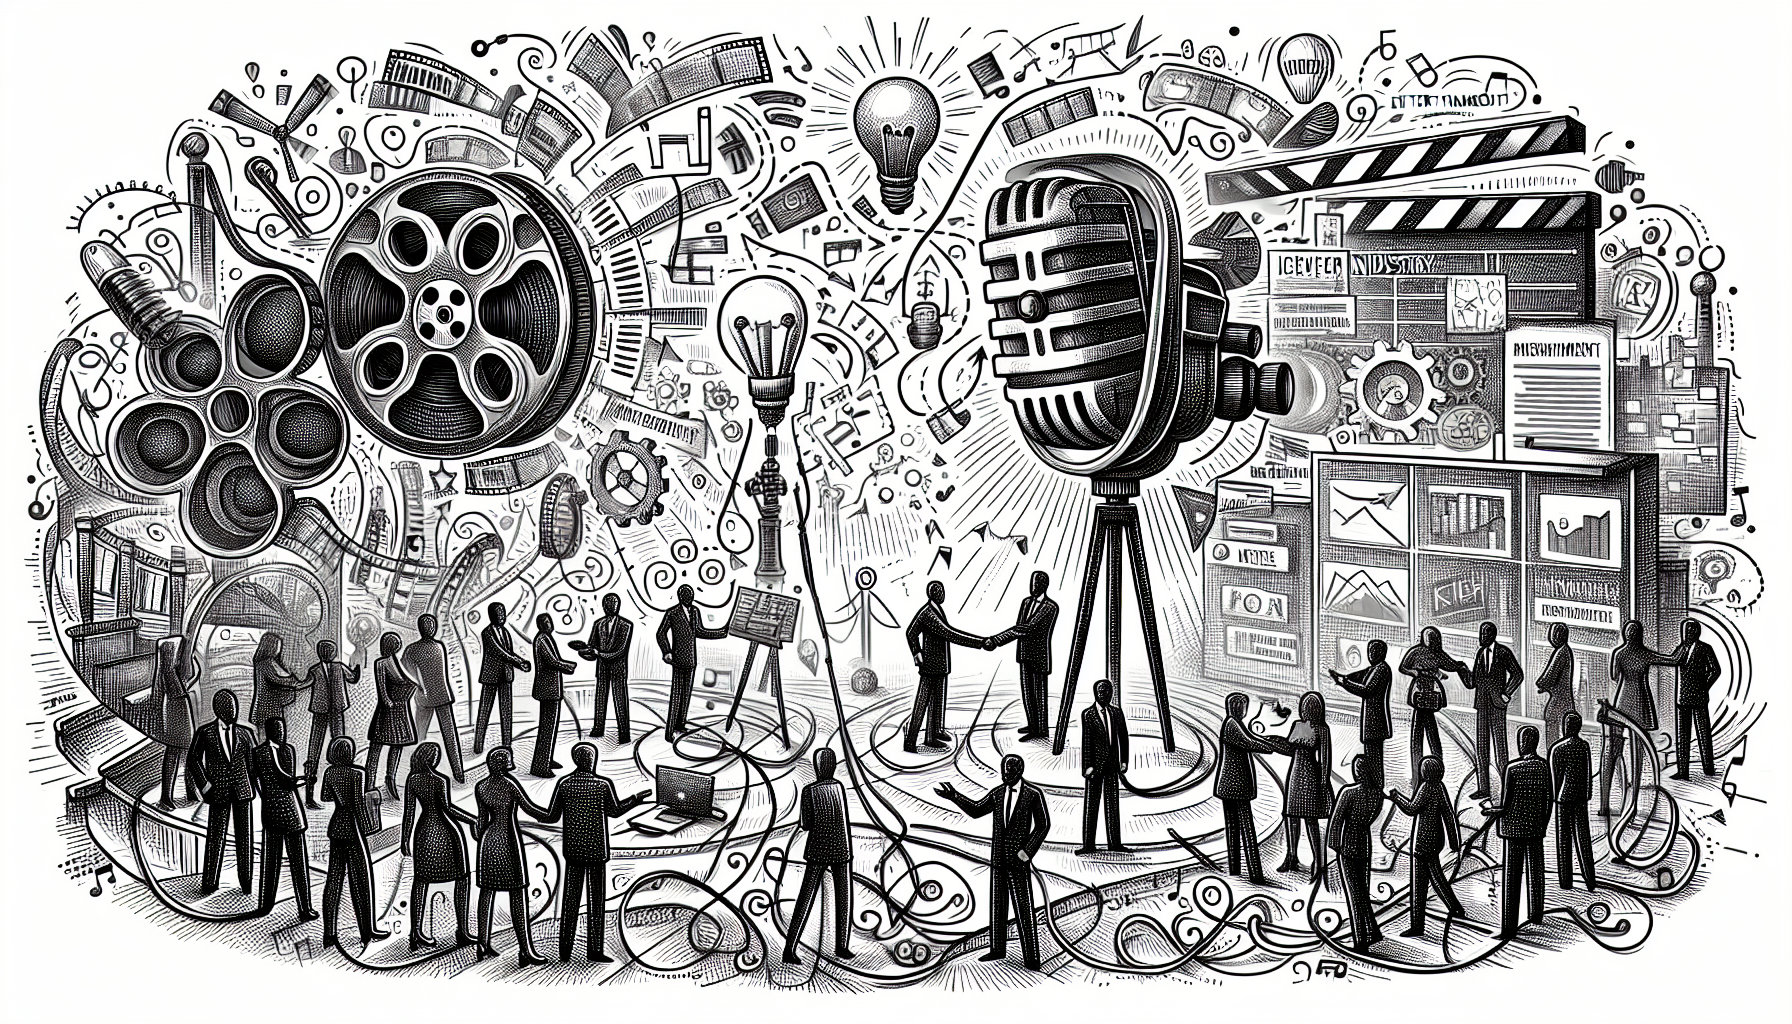 Illustration of effective marketing strategies in the entertainment industry